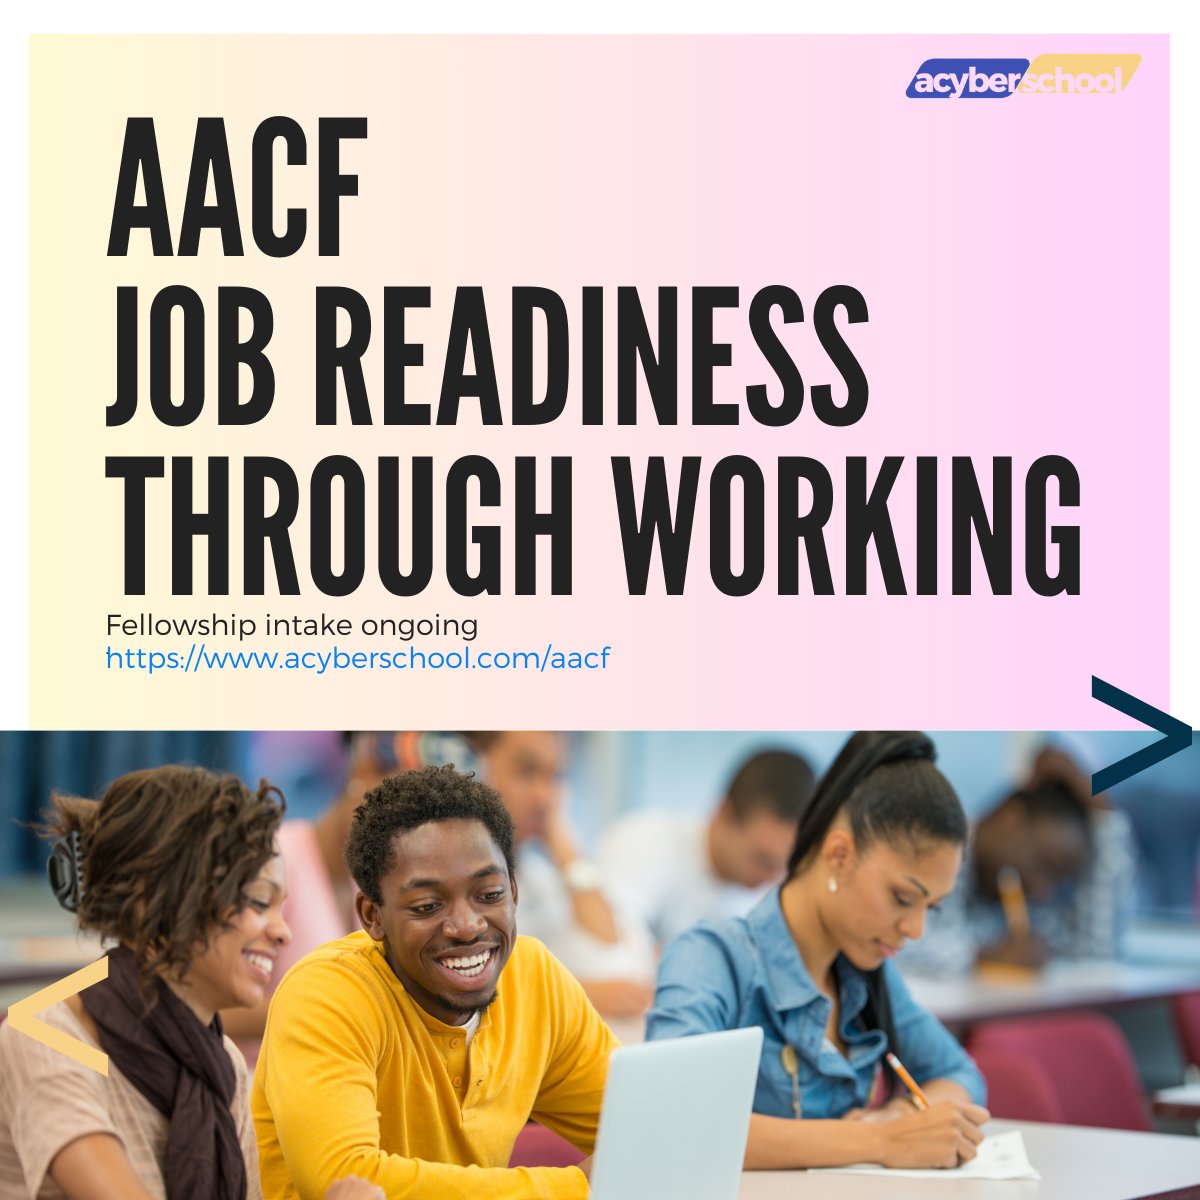 Are you a final year student or recently graduated from cybersecurity and you are looking for a fellowship that can admit you for a one year training, the AACF initiative is here to help you. This training involves working on real-world cybersecurity problems in real organiza ...